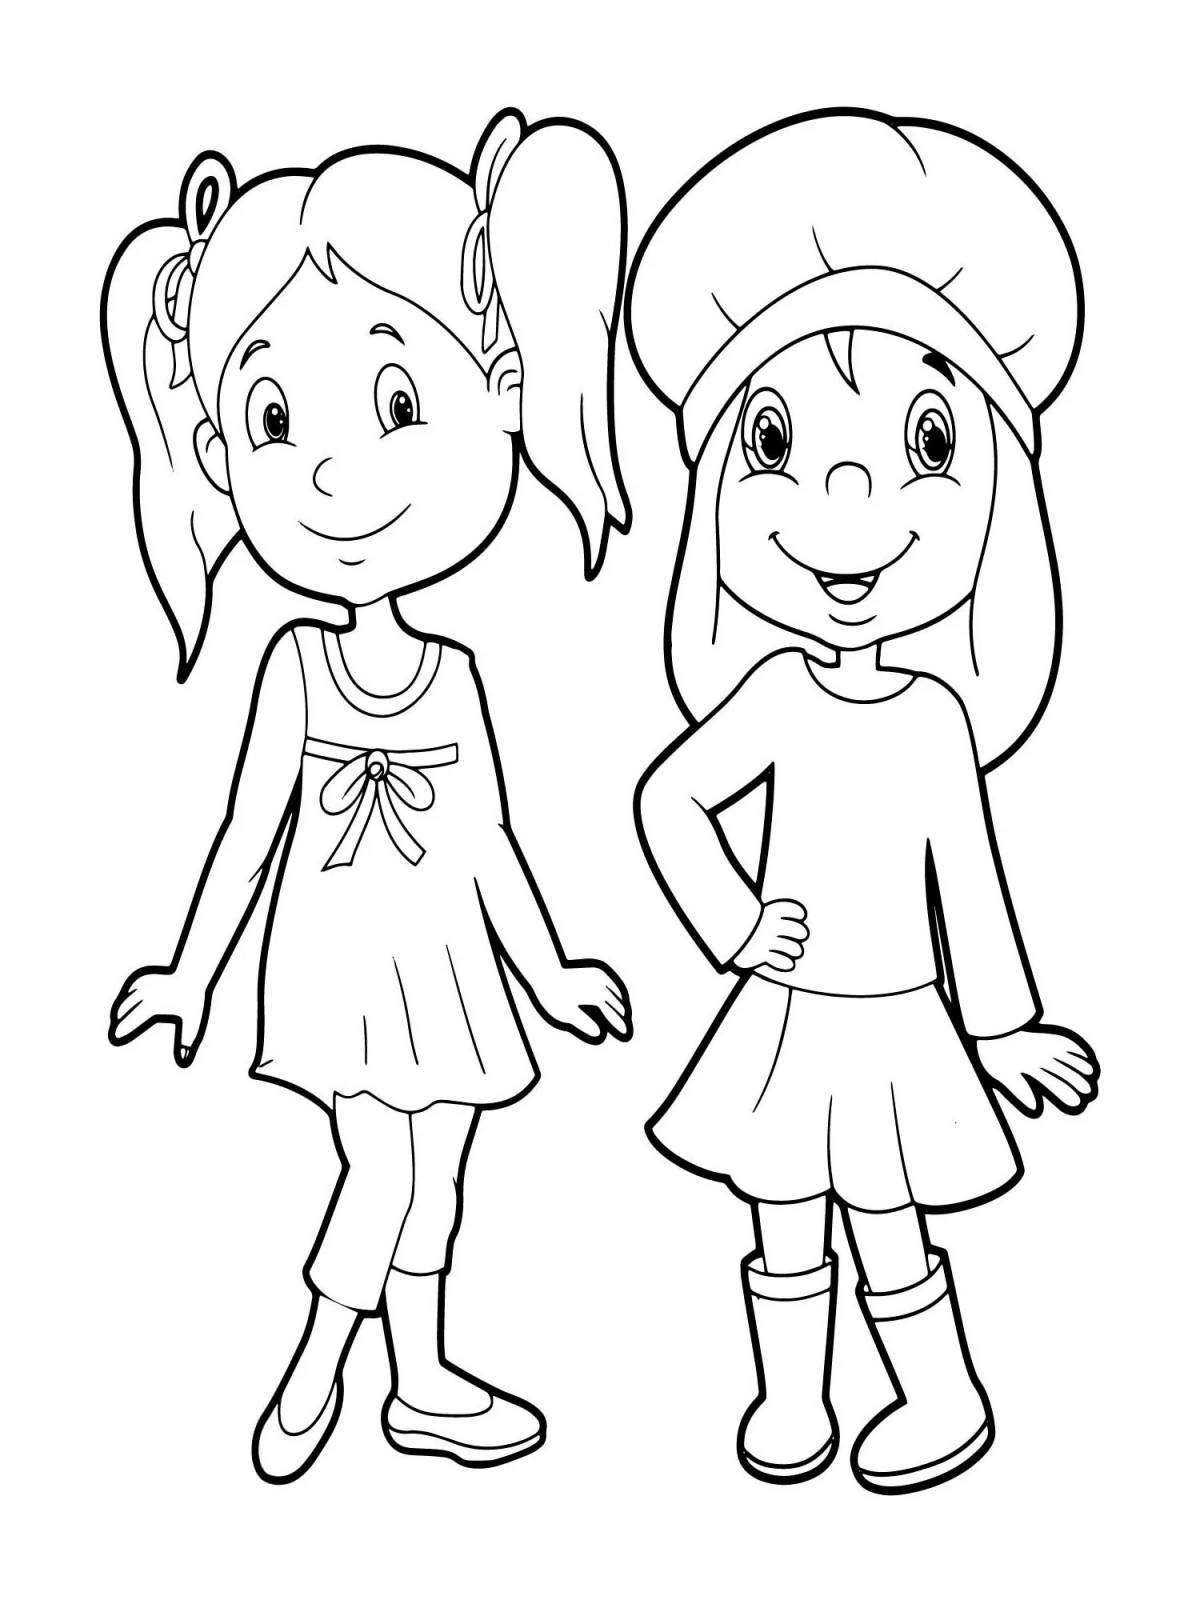 Violent cartoon sisters coloring pages